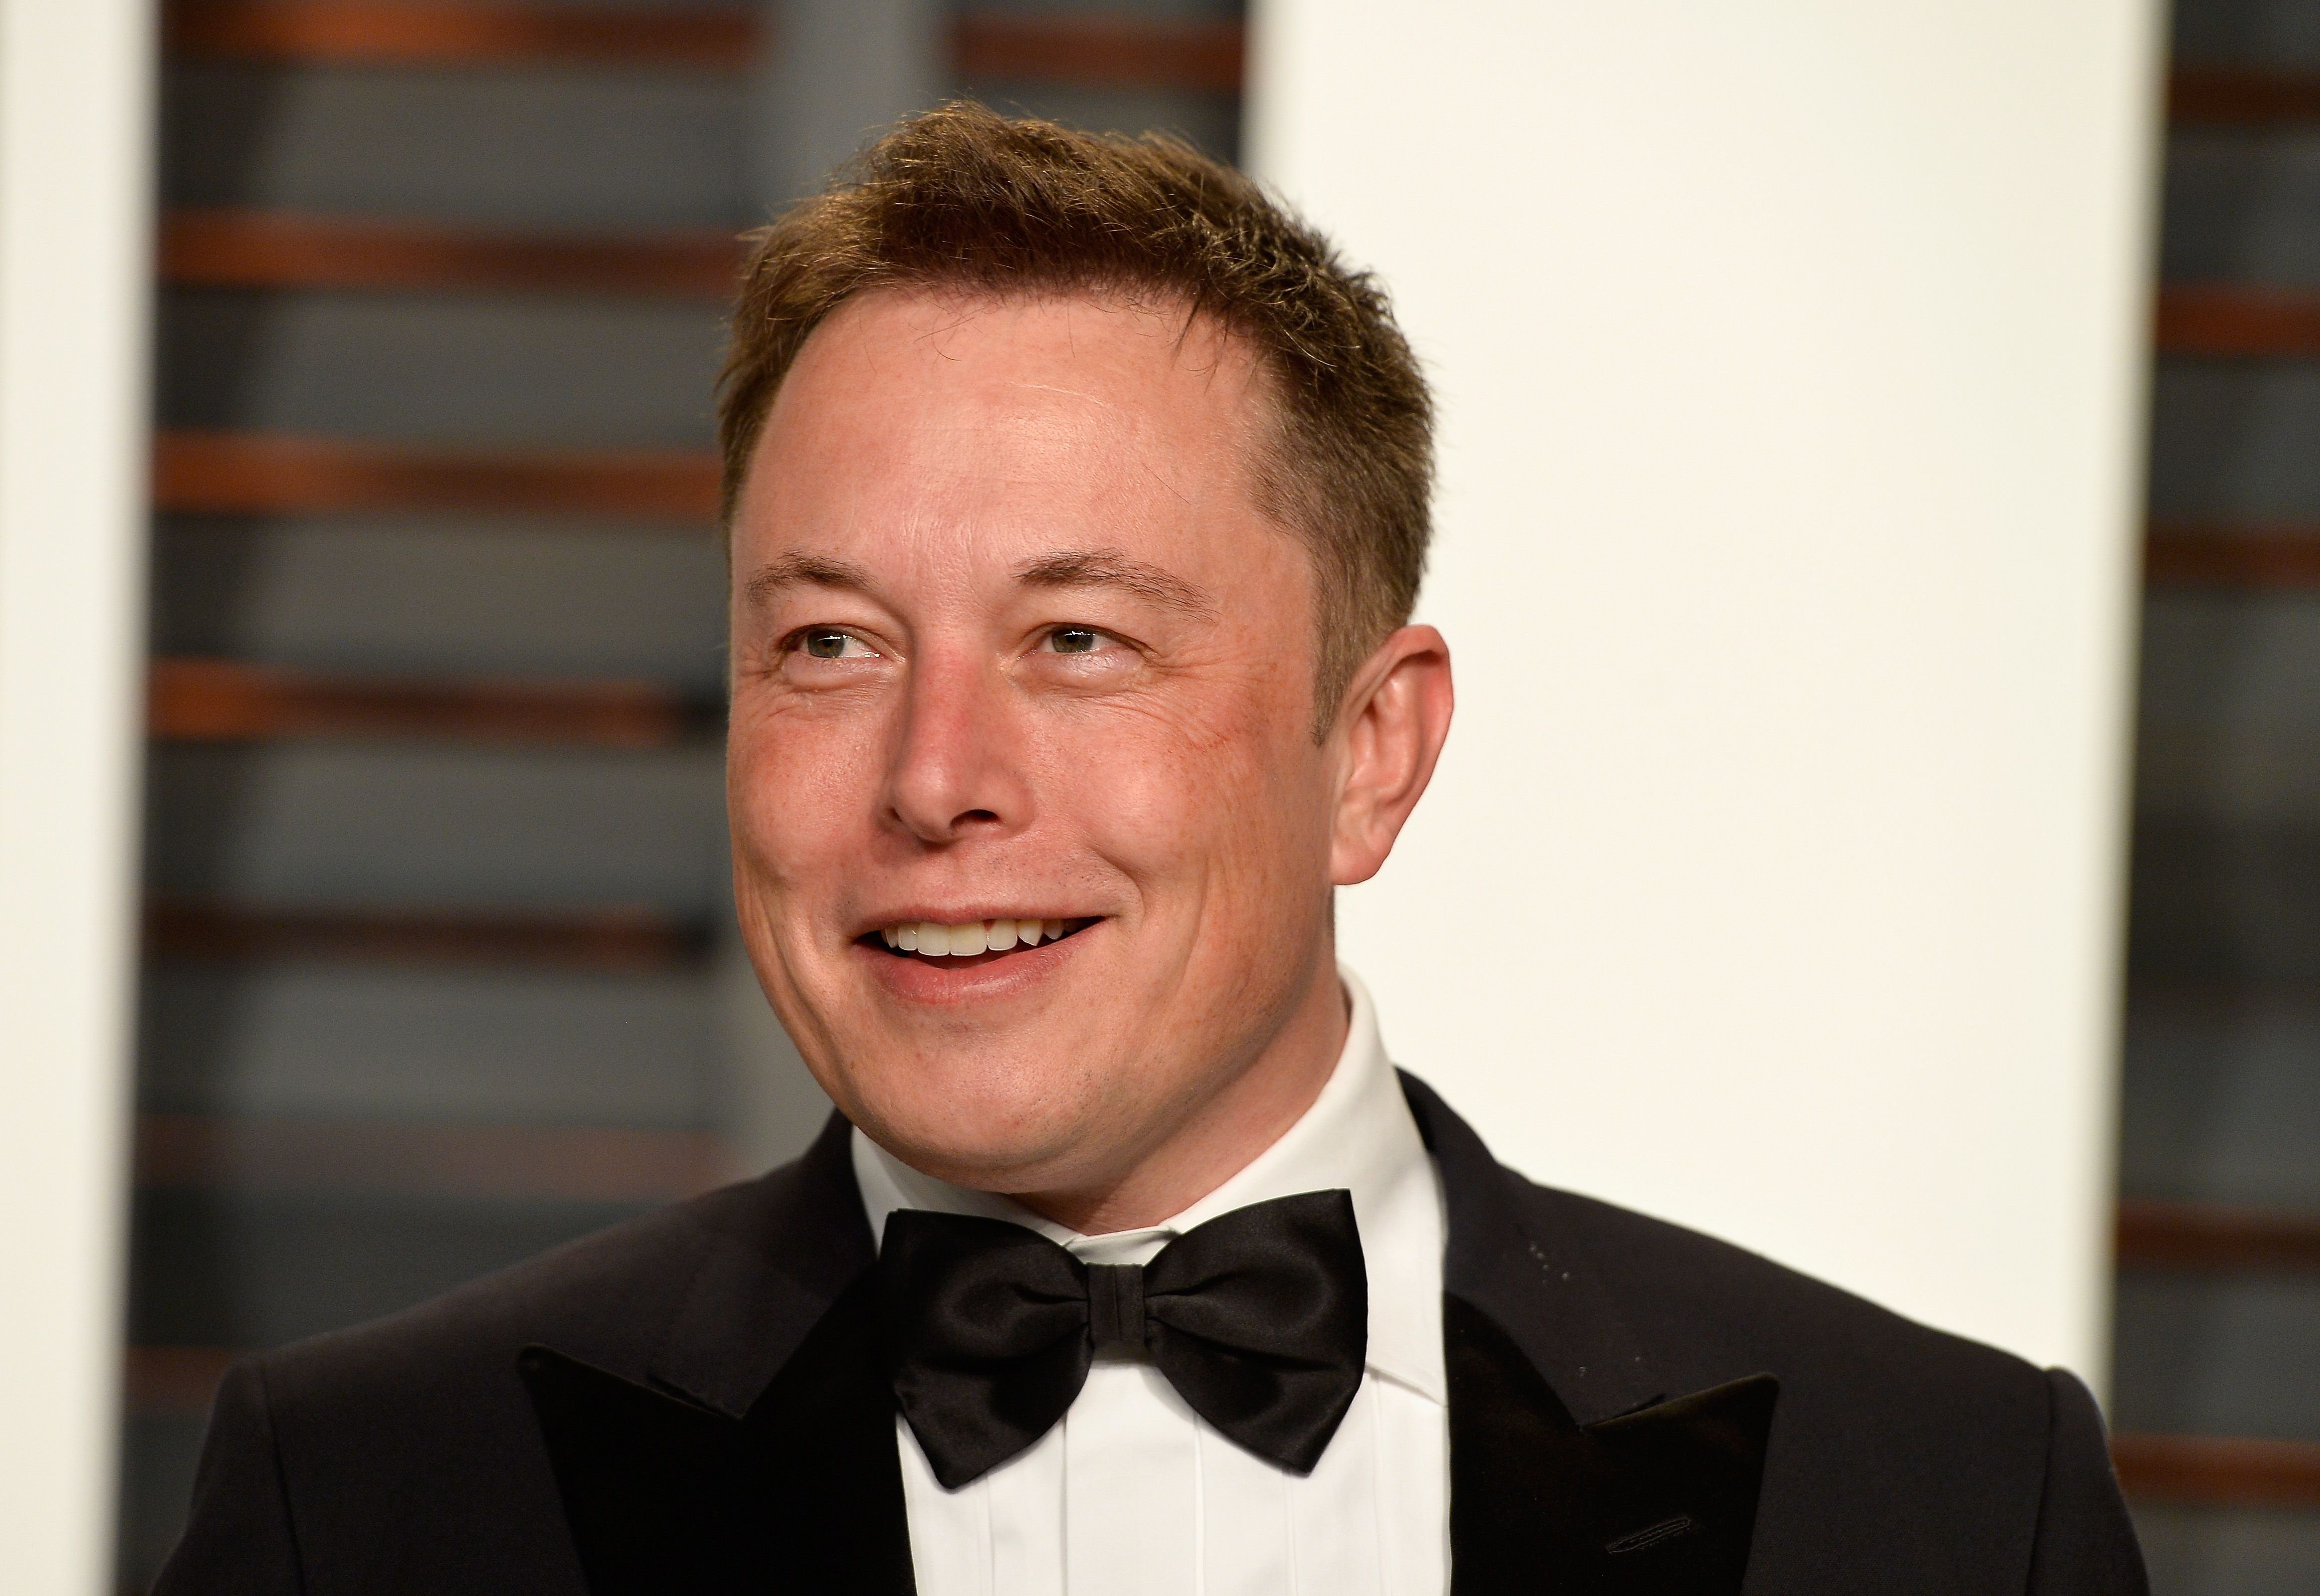 Elon Musk at the Vanity Fair Oscar Party on February 22, 2015, in Beverly Hills, California | Photo: Pascal Le Segretain/Getty Images